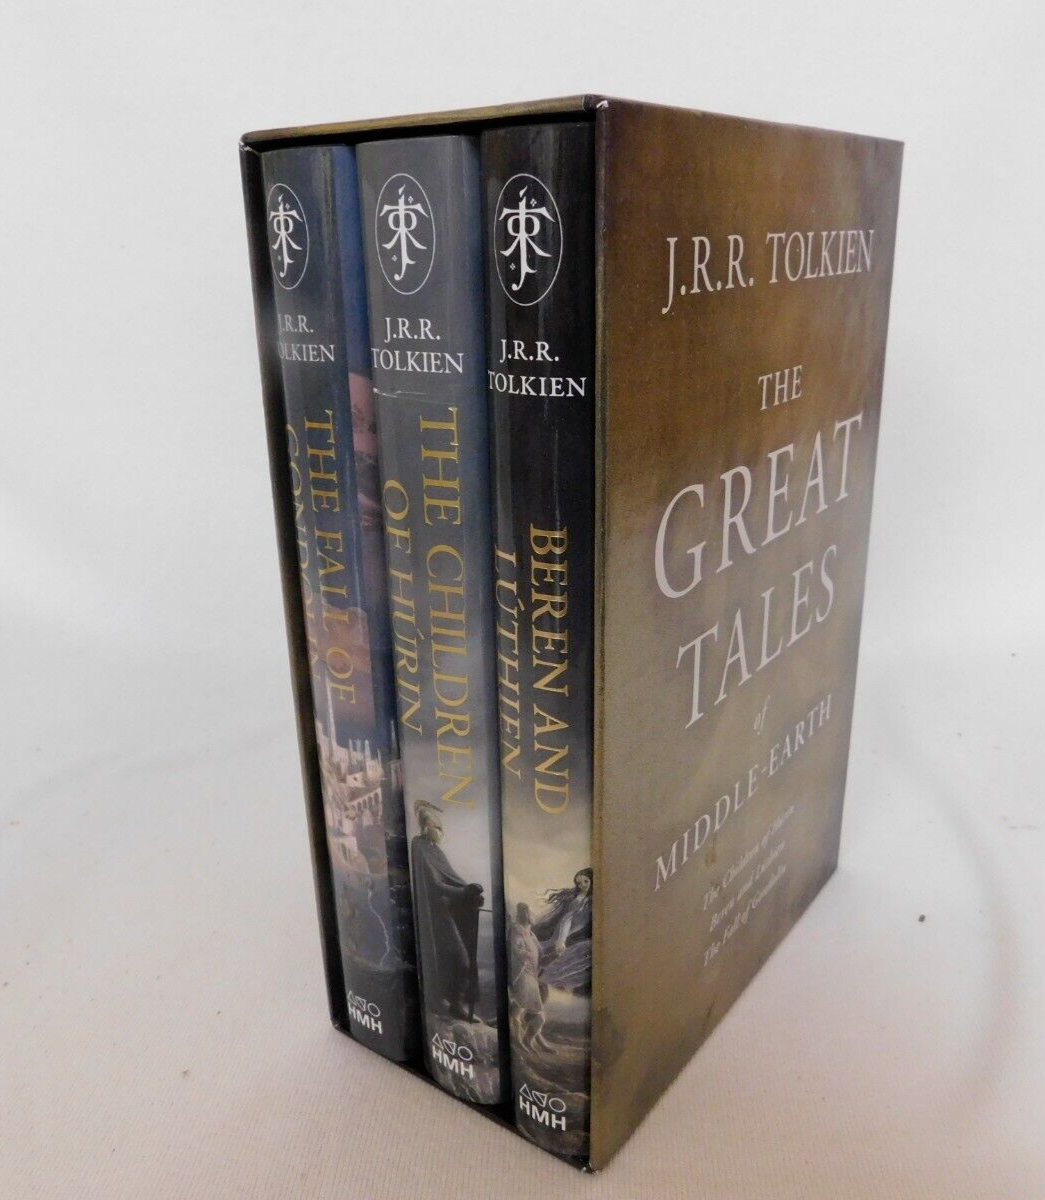 THE GREAT TALES OF MIDDLE EARTH